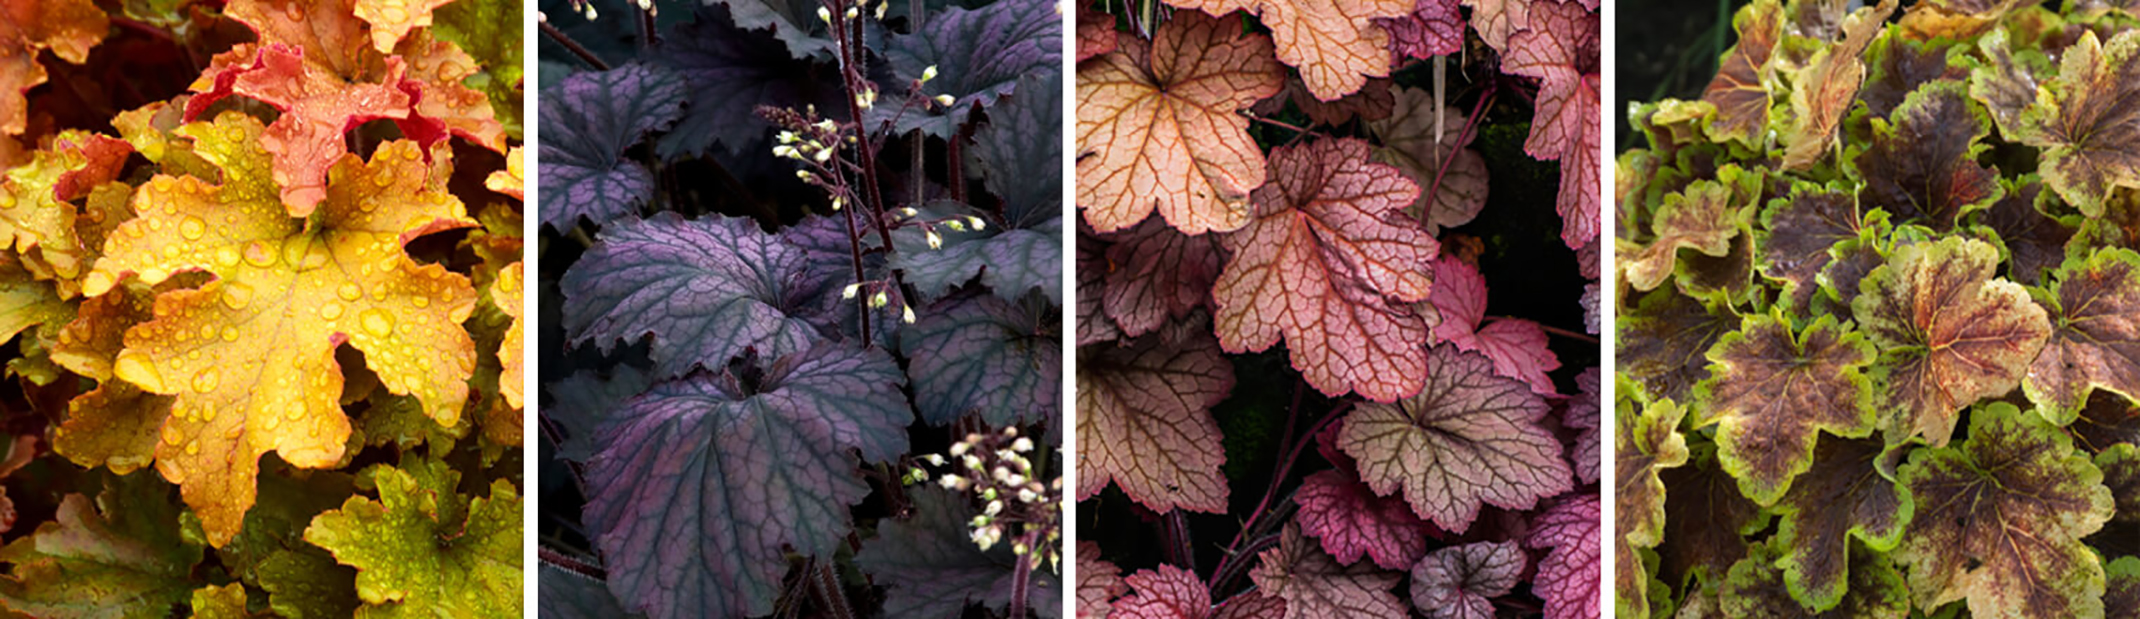 4 images of heuchera, the first is an orange color the second is a purple black color, the thrid is a deep purple red with a peach blush and the fourth is a green heuchera with purple inside